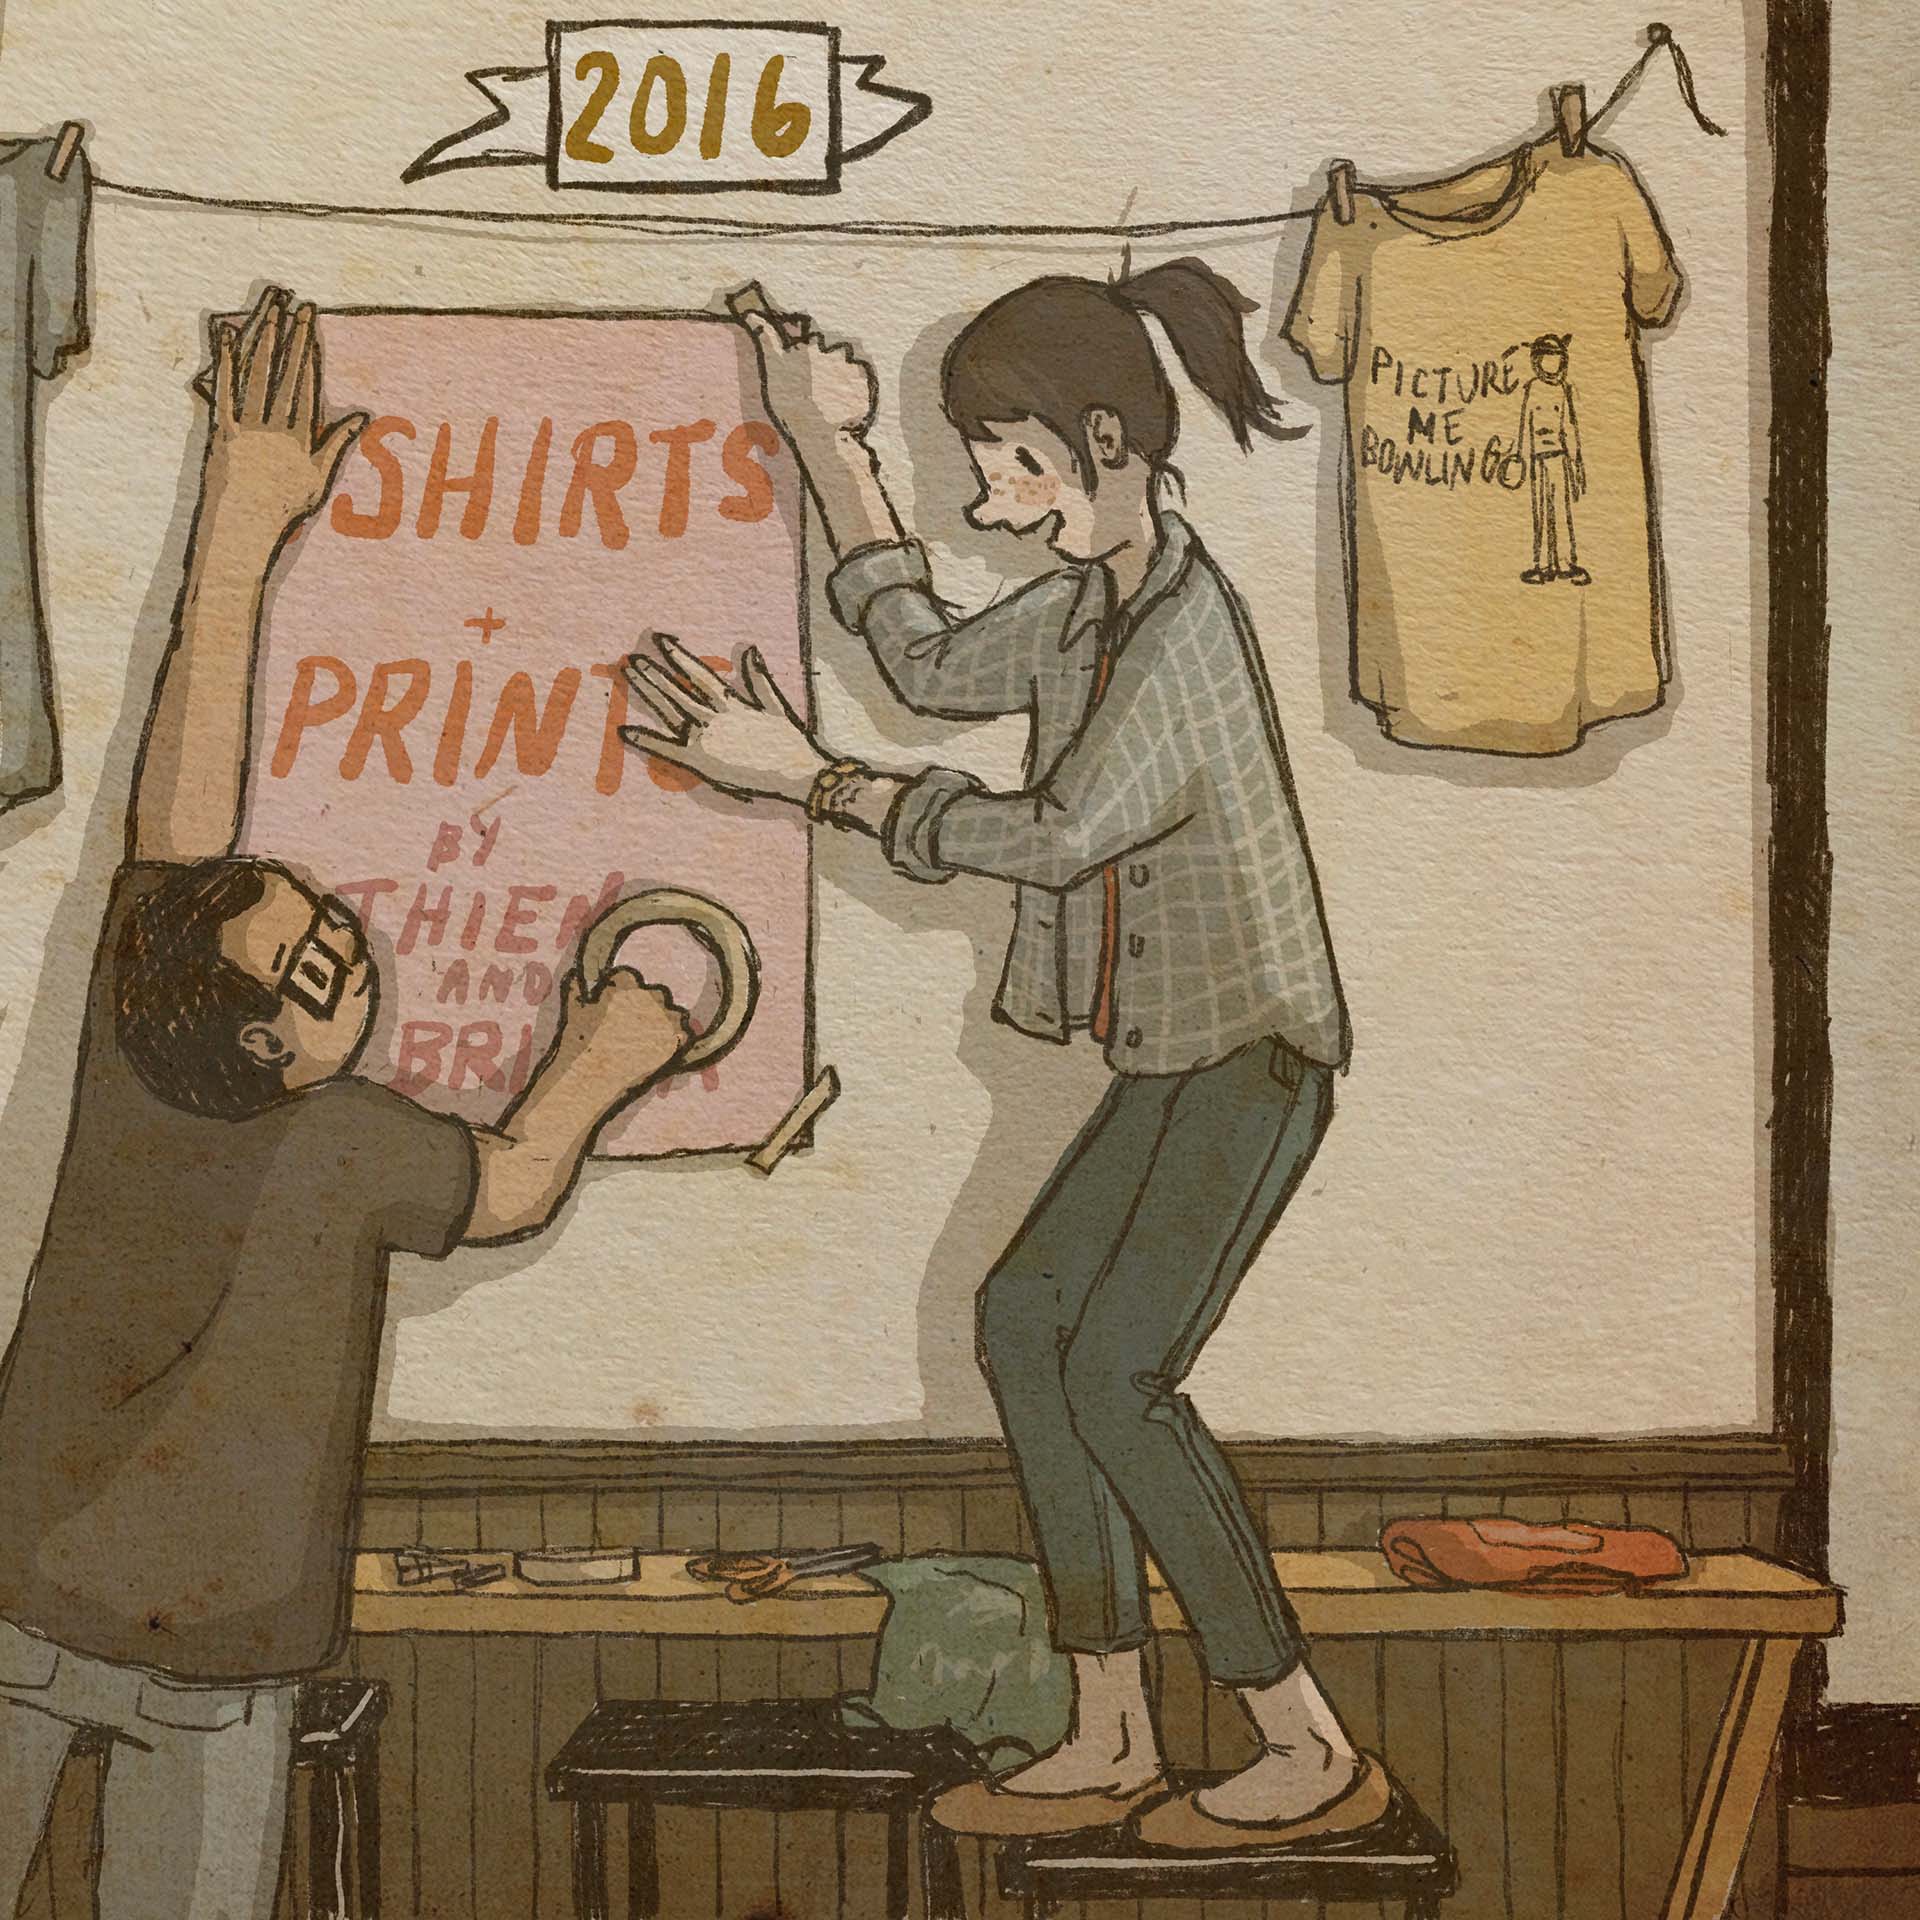 2016: Briana stands on a stool to hang up a poster that reads, "Shirts + Prints by Thien and Briana" on the wall, probably of the same coffee shop. Holding a roll of masking tape, Thien (the friend) helps from below. A t-shirt pinned to a clothesline above depicts a man holding a bowling ball and reads, "Picture Me Bowling."